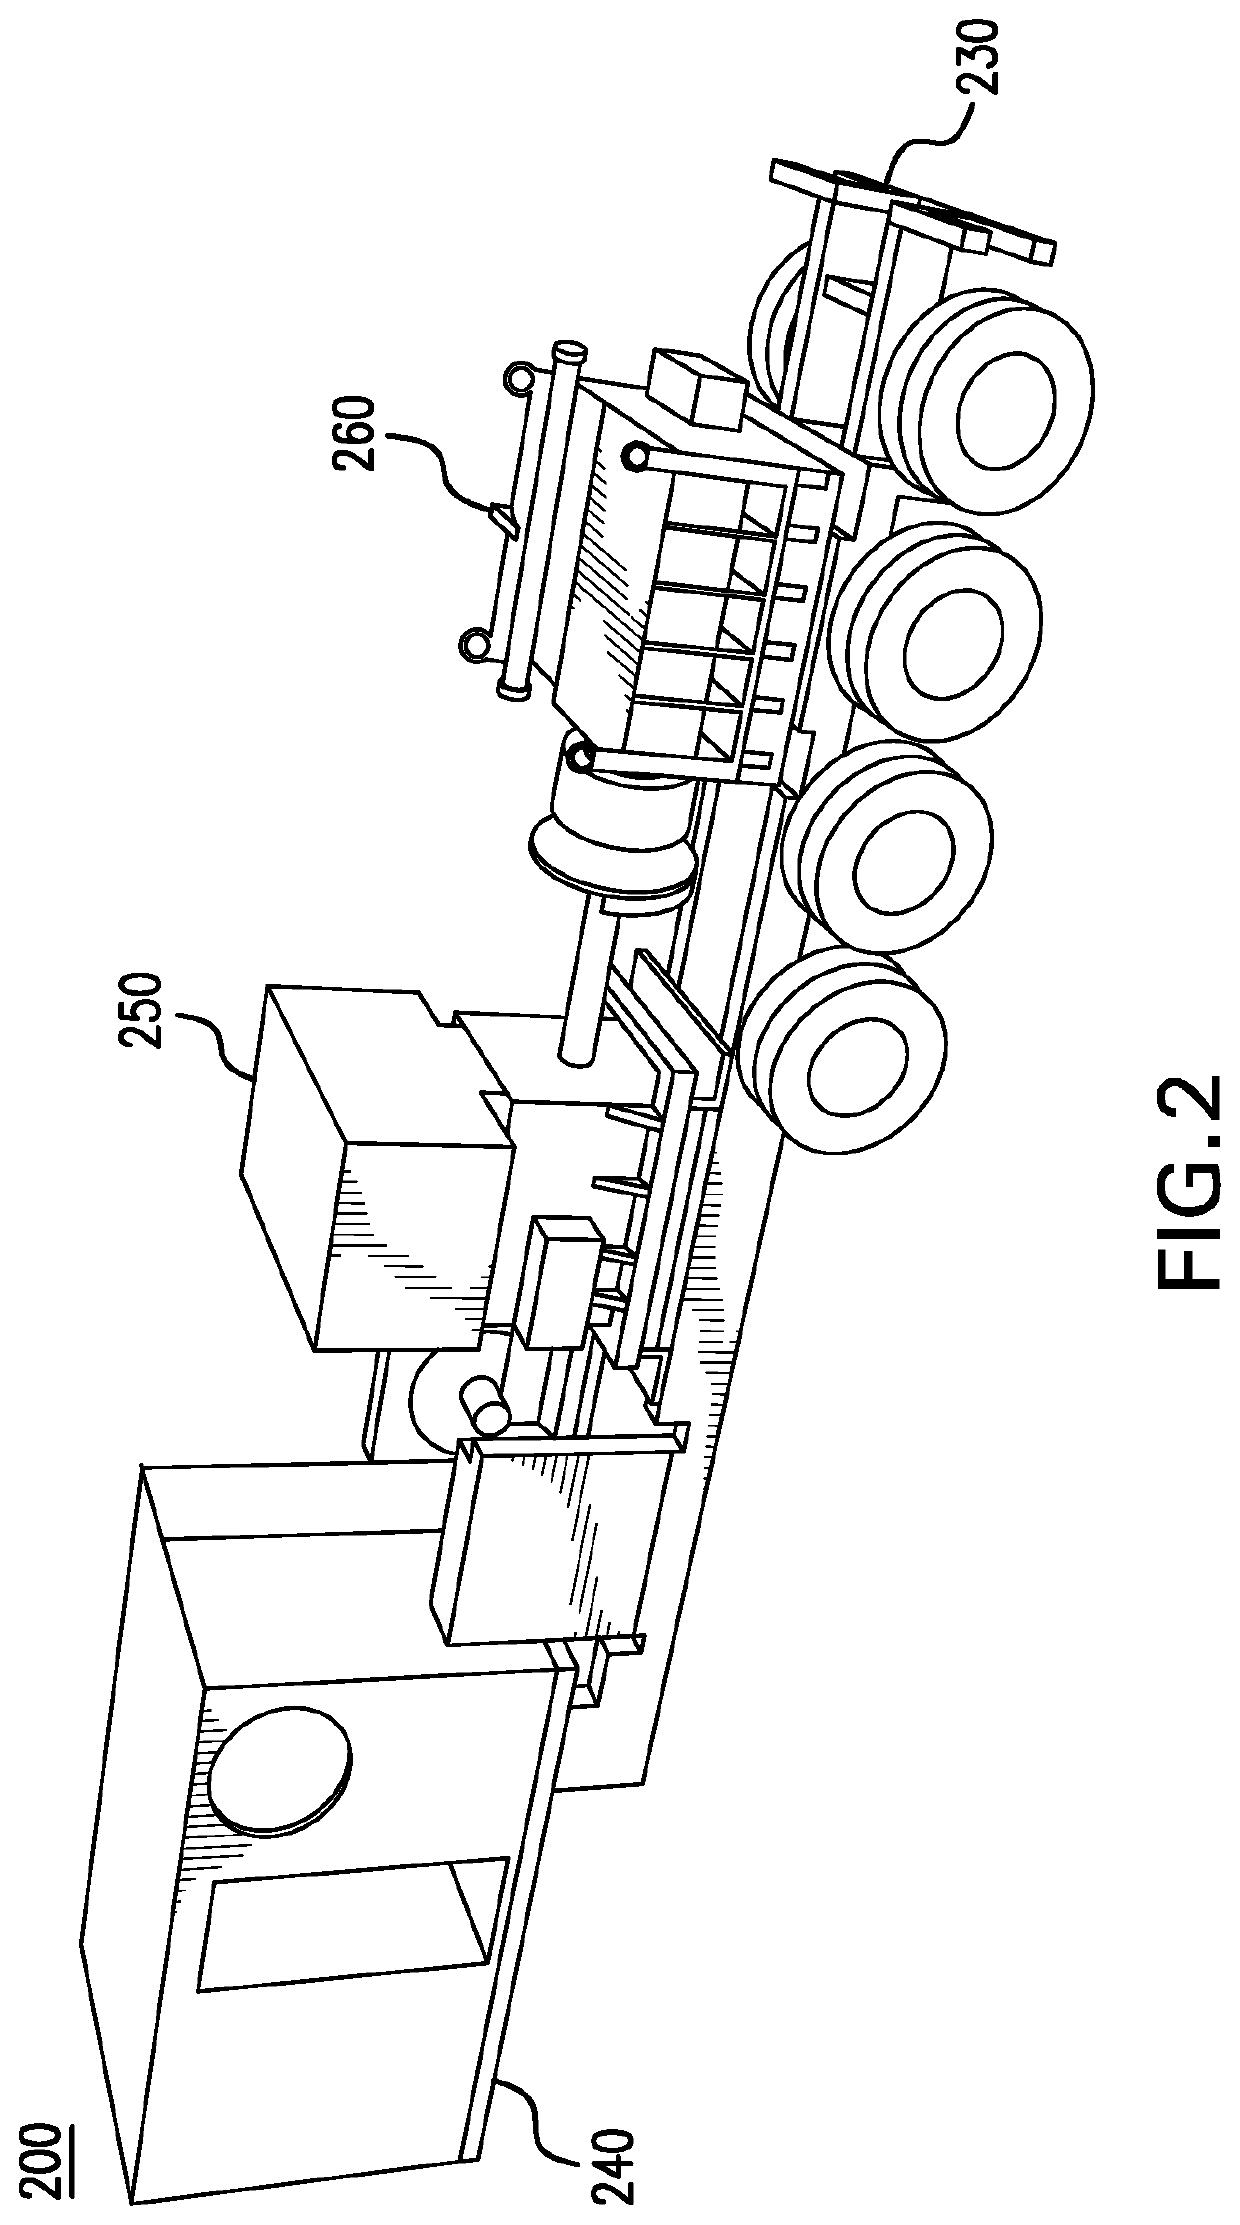 Variable frequency drive configuration for electric driven hydraulic fracking system